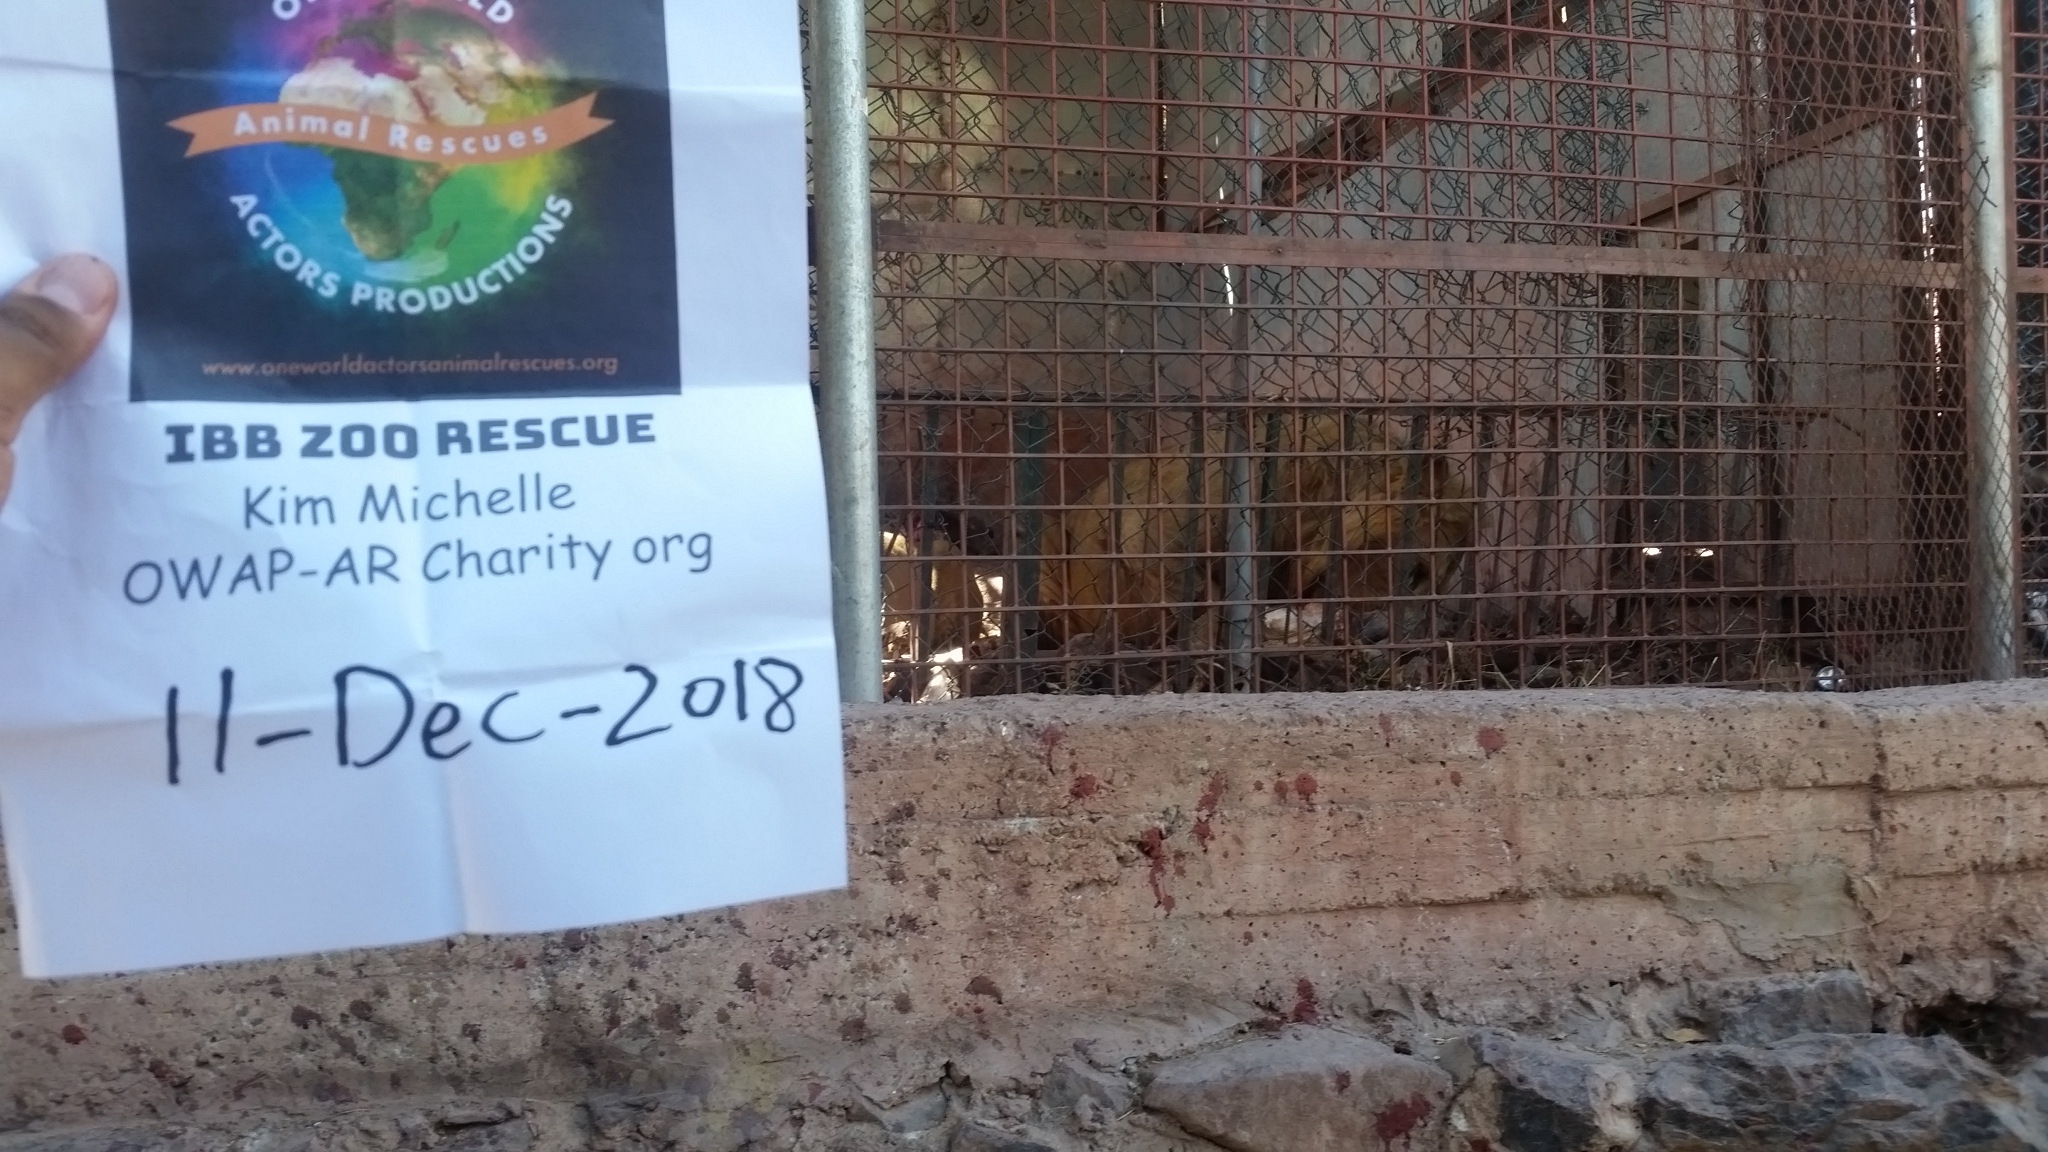 ibb zoo dec 11 DEC 2018 by OWAP AR our lions with our meal hisham pic with sign.jpg